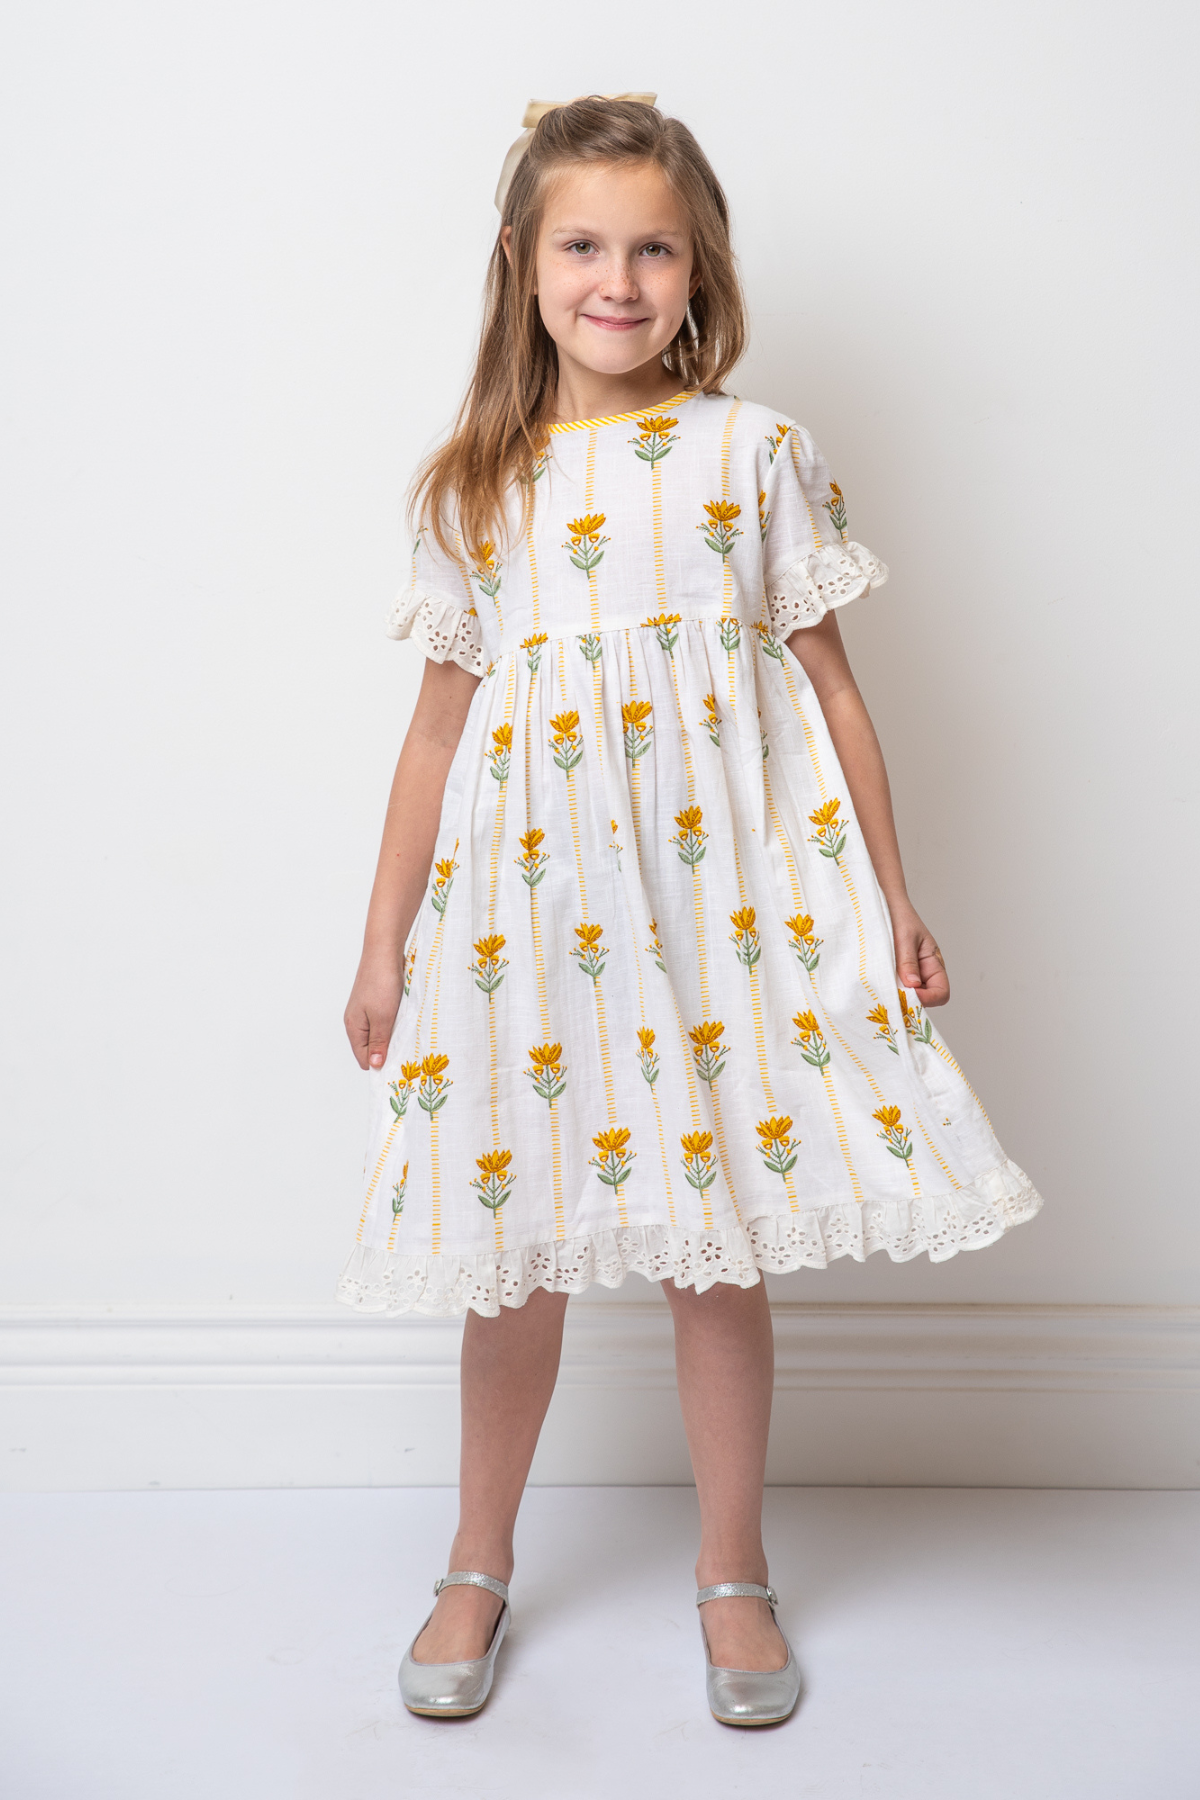 The Lilly Dress in Yellow Floral